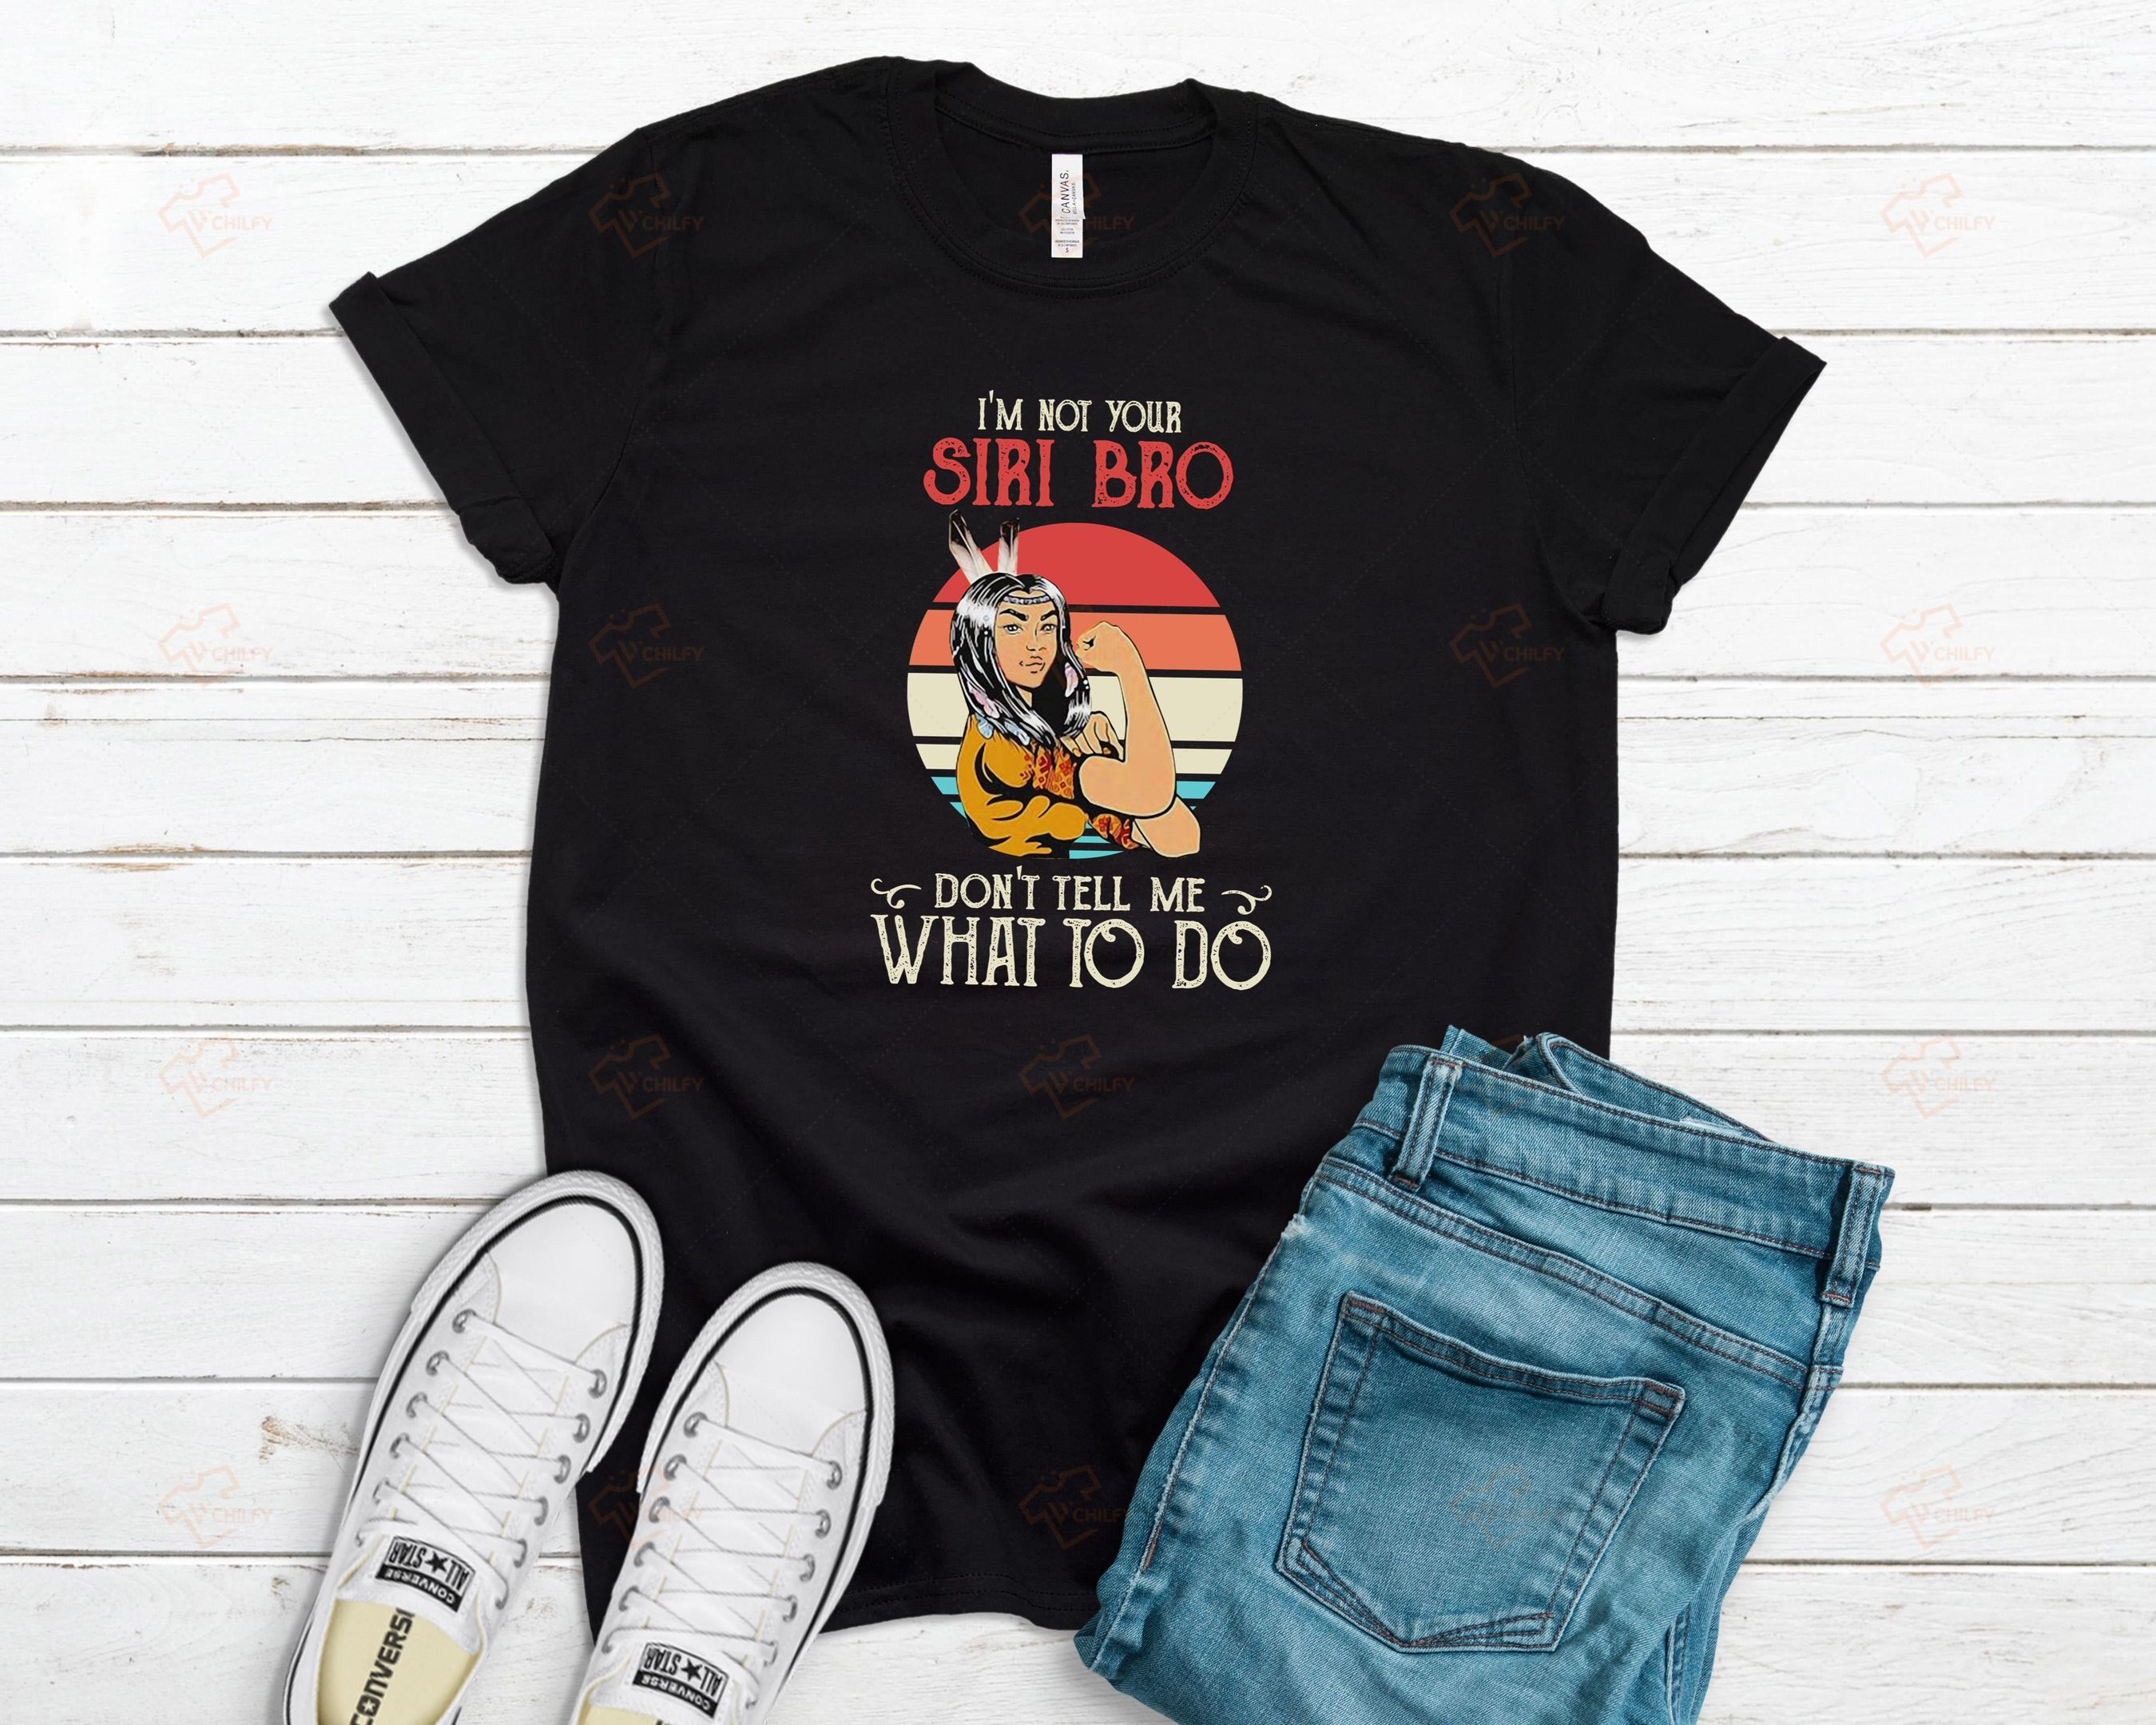 I’m not your siri bro, don’t tell me what to do shirt, badass Native t shirt, Native American shirt, gift for Indigenous people